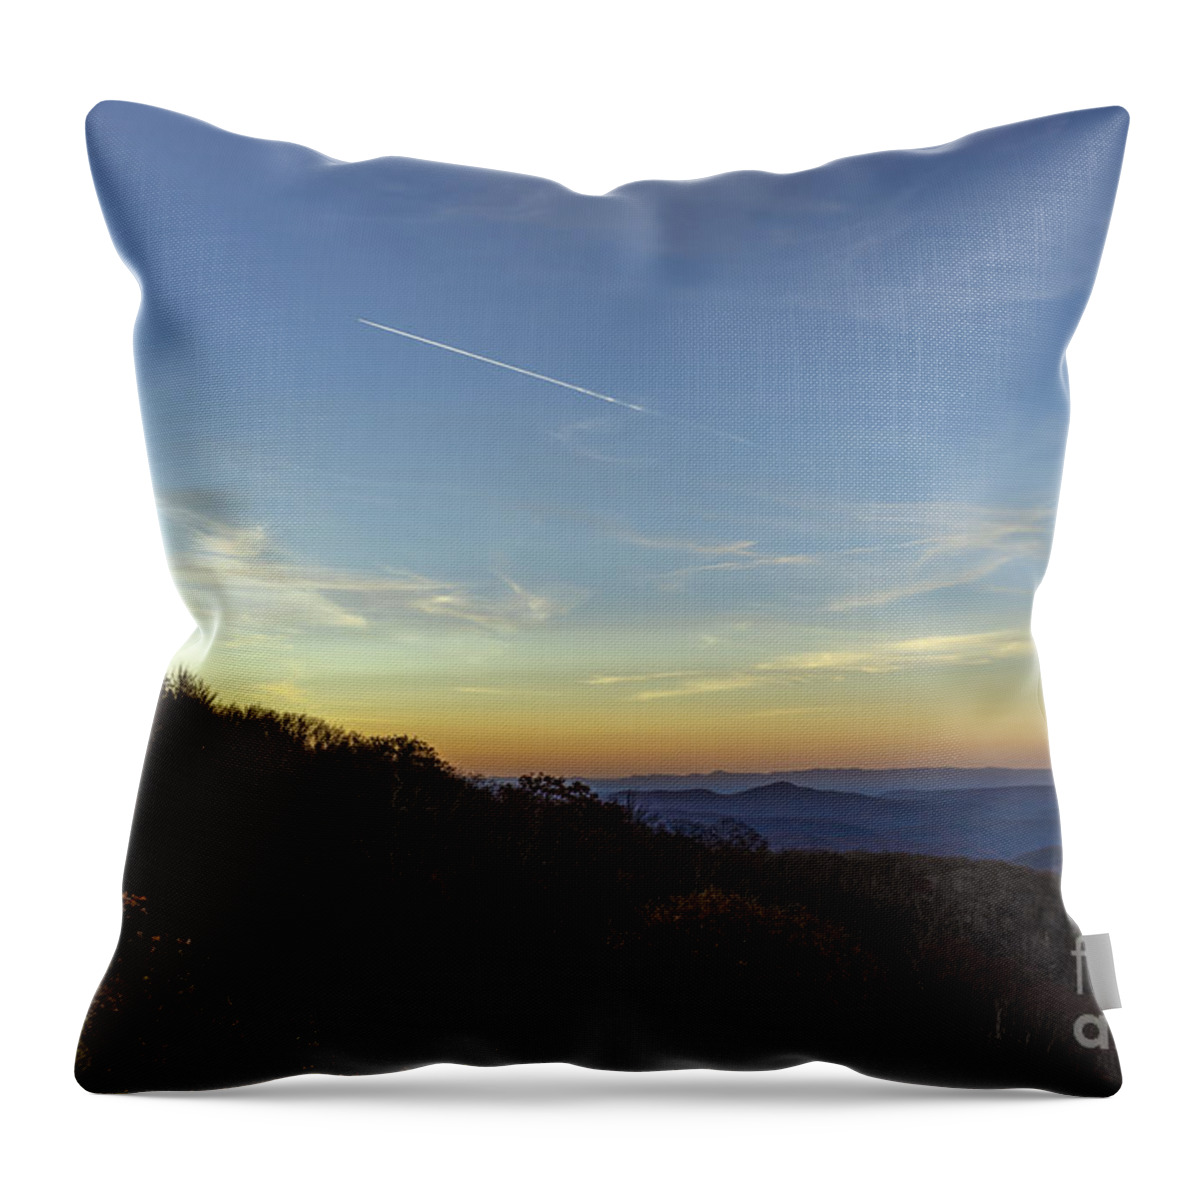 Blue Ridge Parkway Throw Pillow featuring the photograph Blue Ridge Parkway Falling Star Sunset 766 by Ricardos Creations